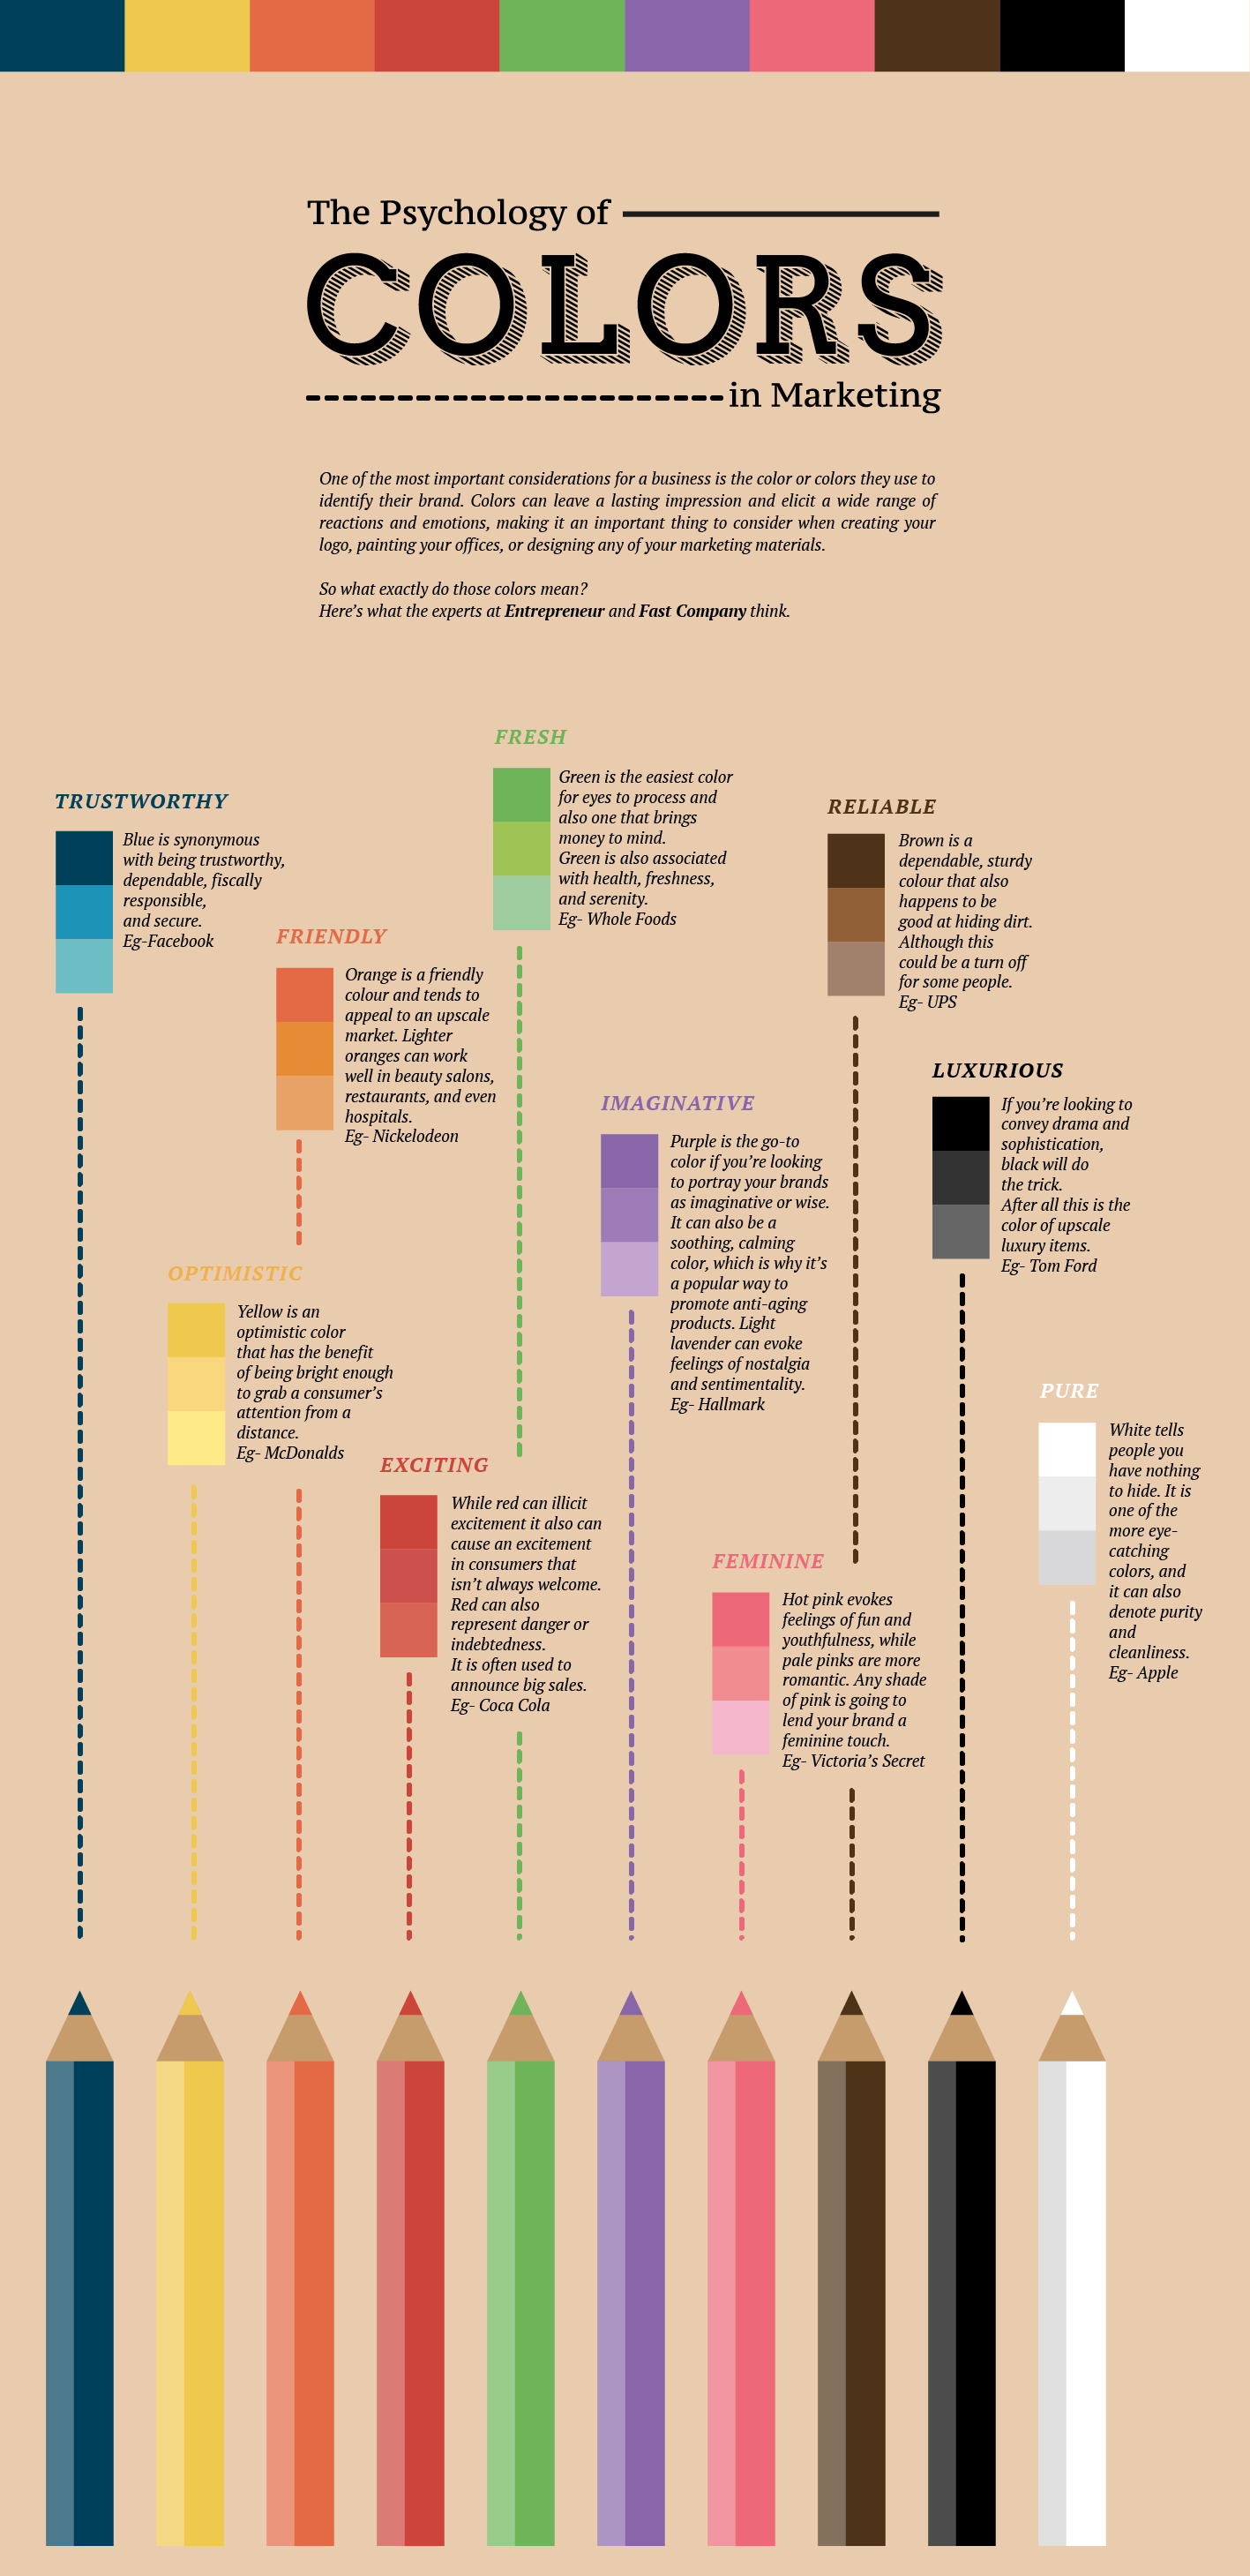 Infographic: 3 Basic Principles of Color Theory for Designers